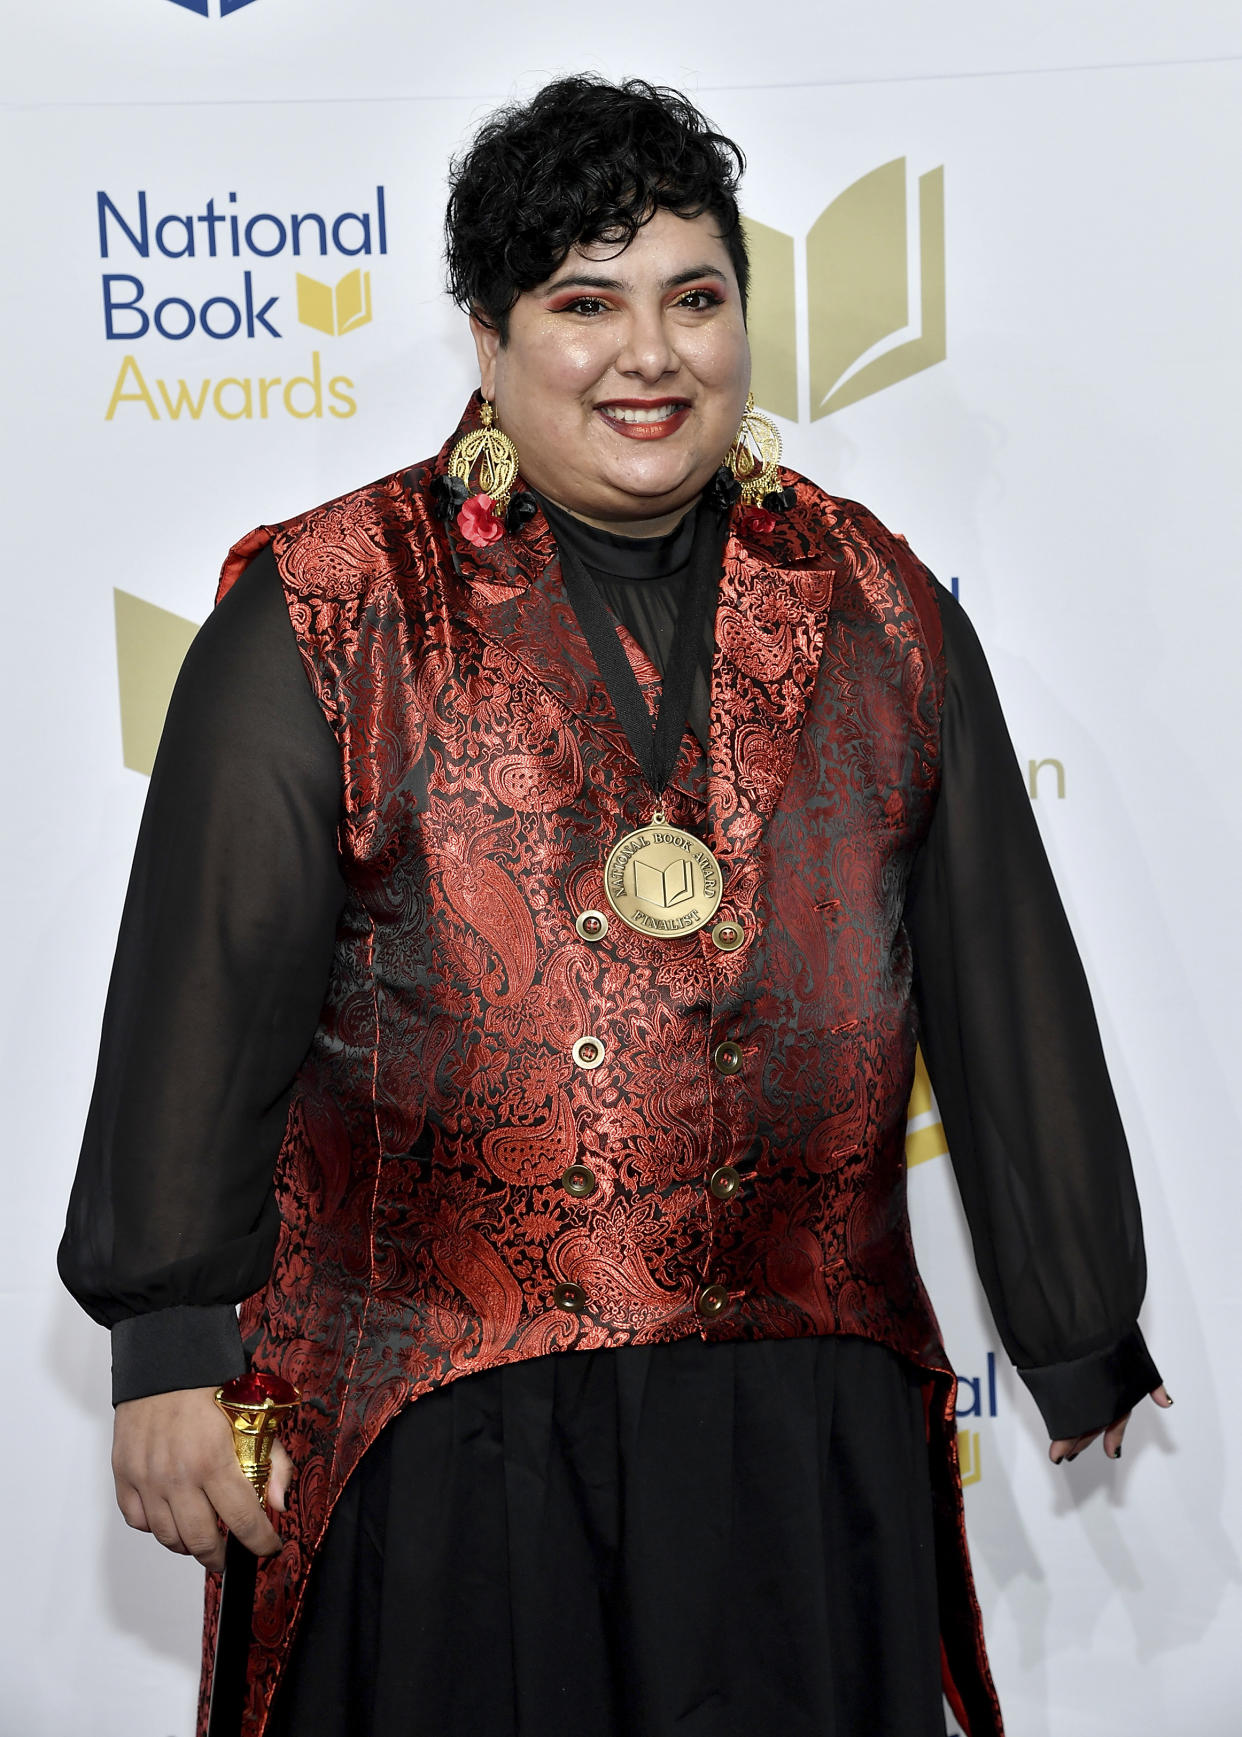 Young People's Literature finalist Sonora Reyes attends the 73rd National Book Awards, at Cipriani Wall Street on Wednesday, Nov. 16, 2022, in New York. (Photo by Evan Agostini/Invision/AP)